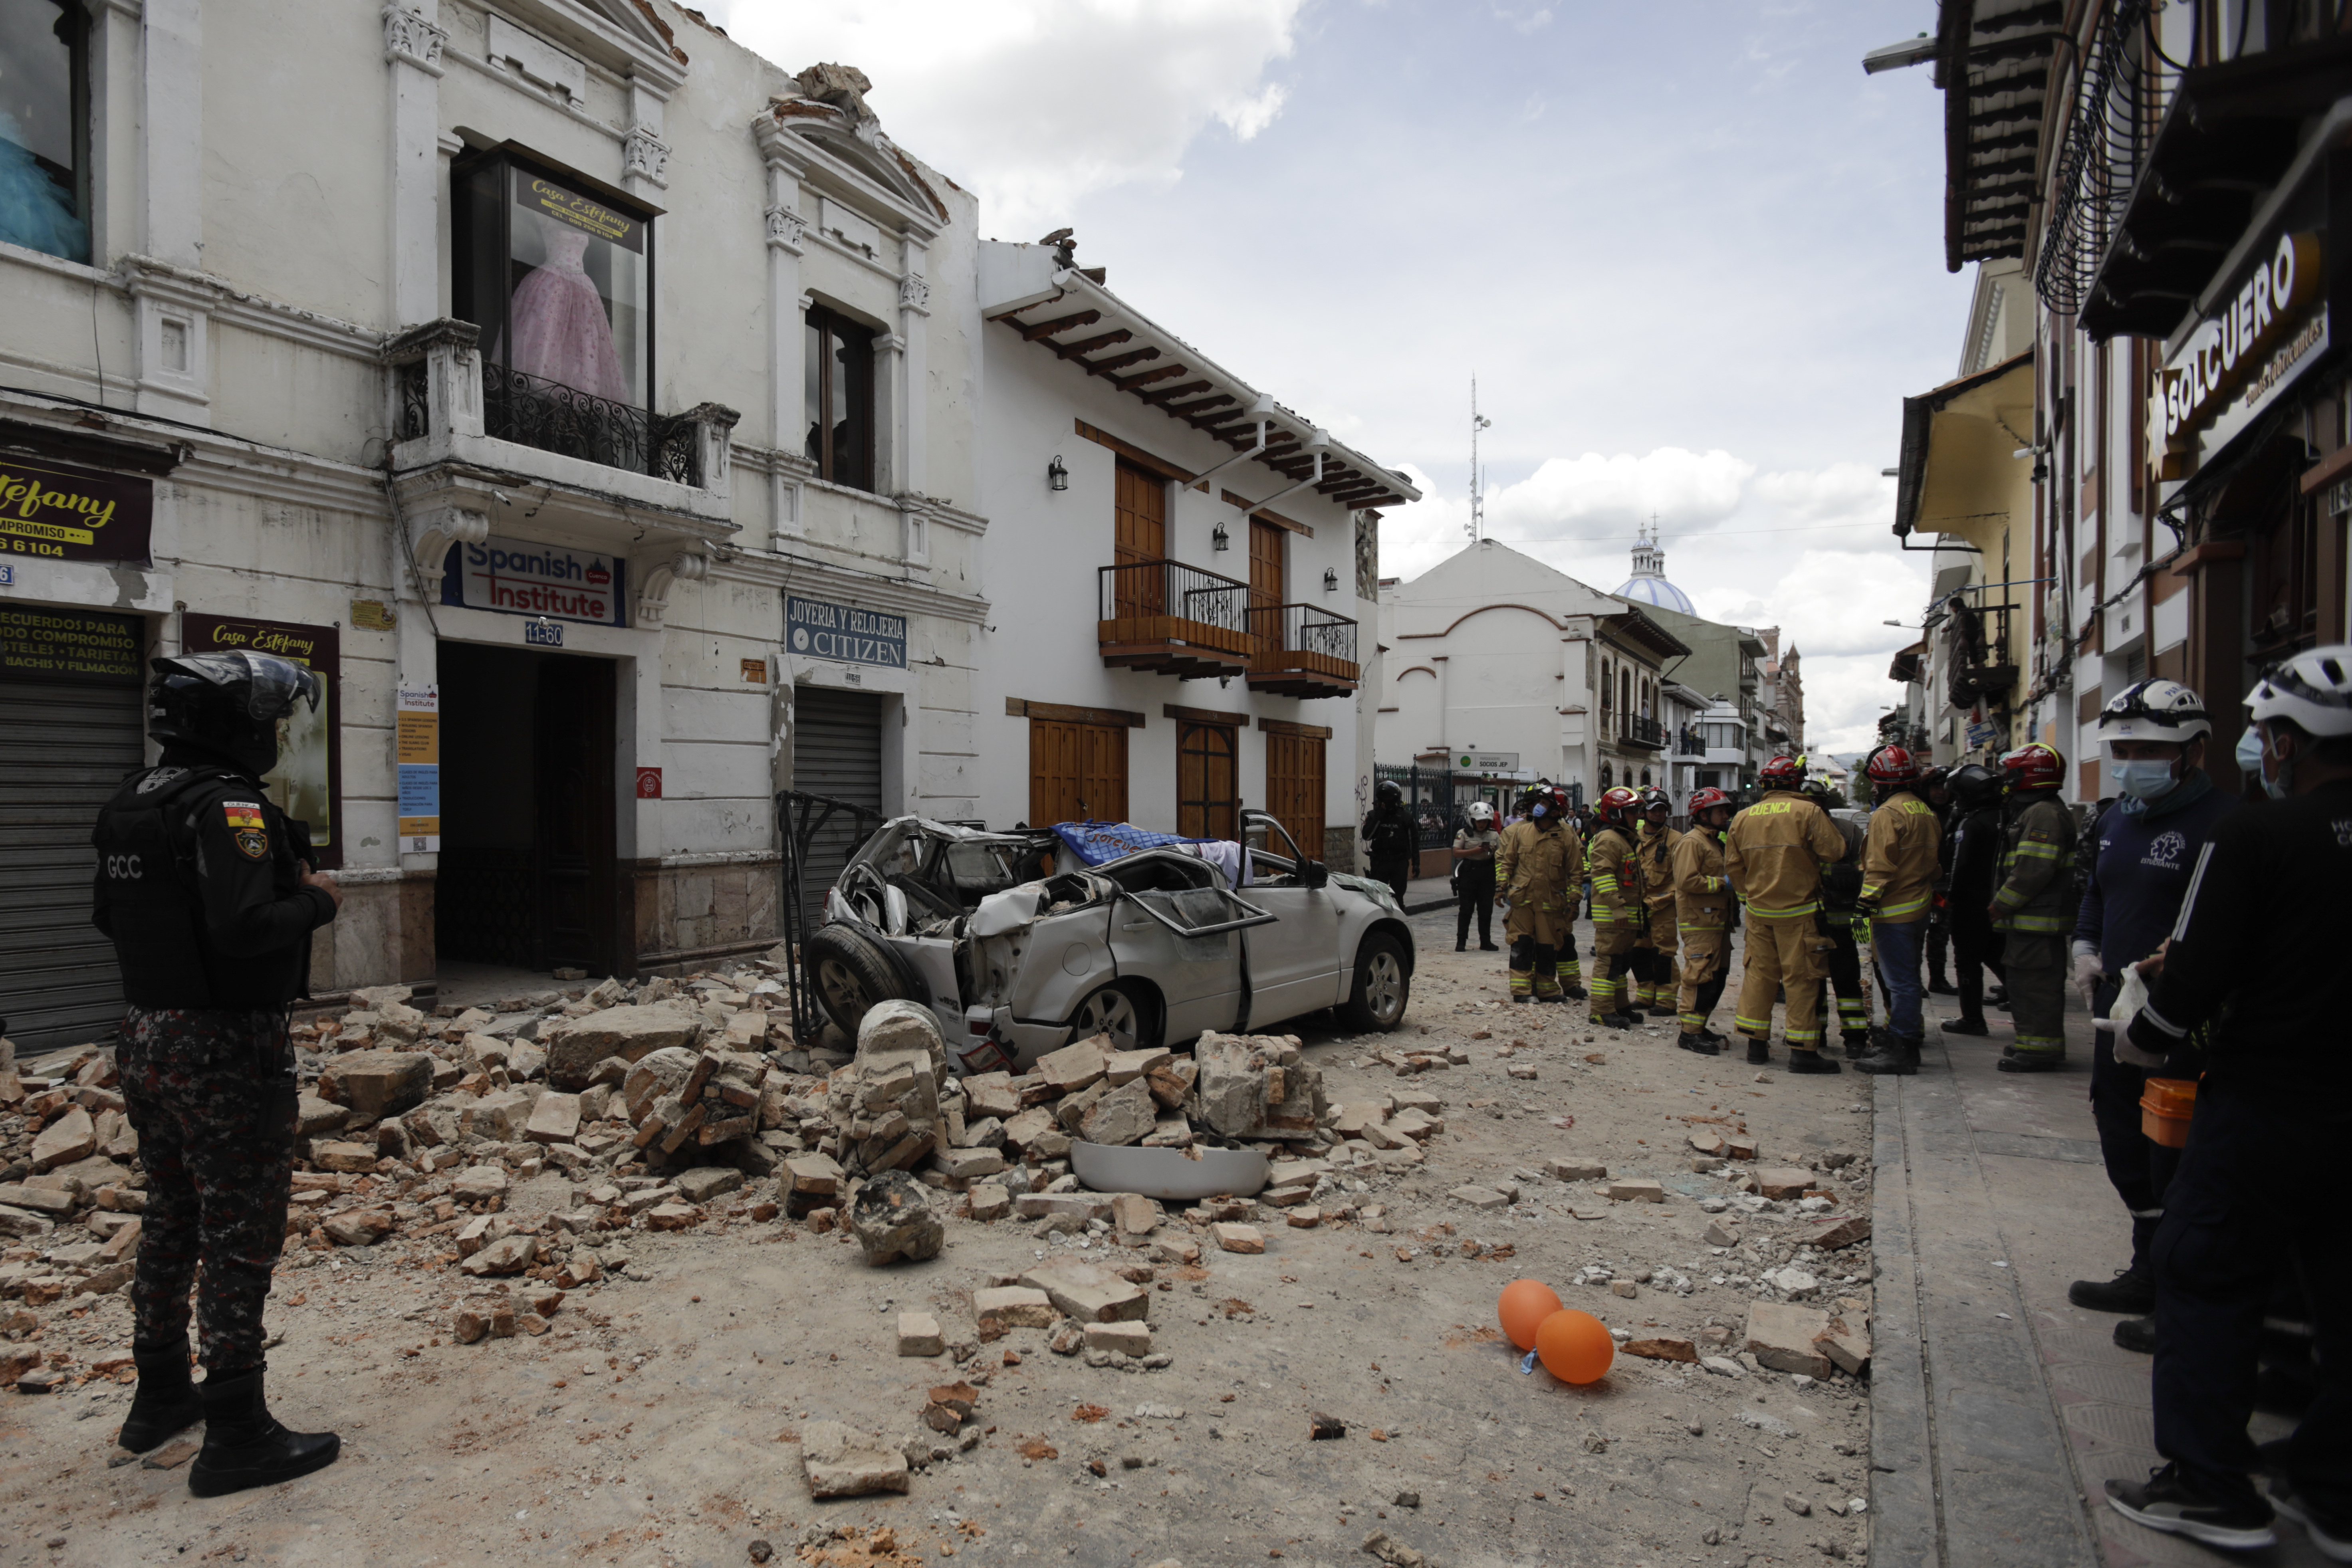 Rescuers stand next to a car crushed by debris from an earthquake, in Cuenca, Ecuador, Saturday, March 18, 2023. The US Geological Survey reported the magnitude 6.7 quake about 50 miles south of Guayaquil.  (AP Photo/Xavier Caivinagua)